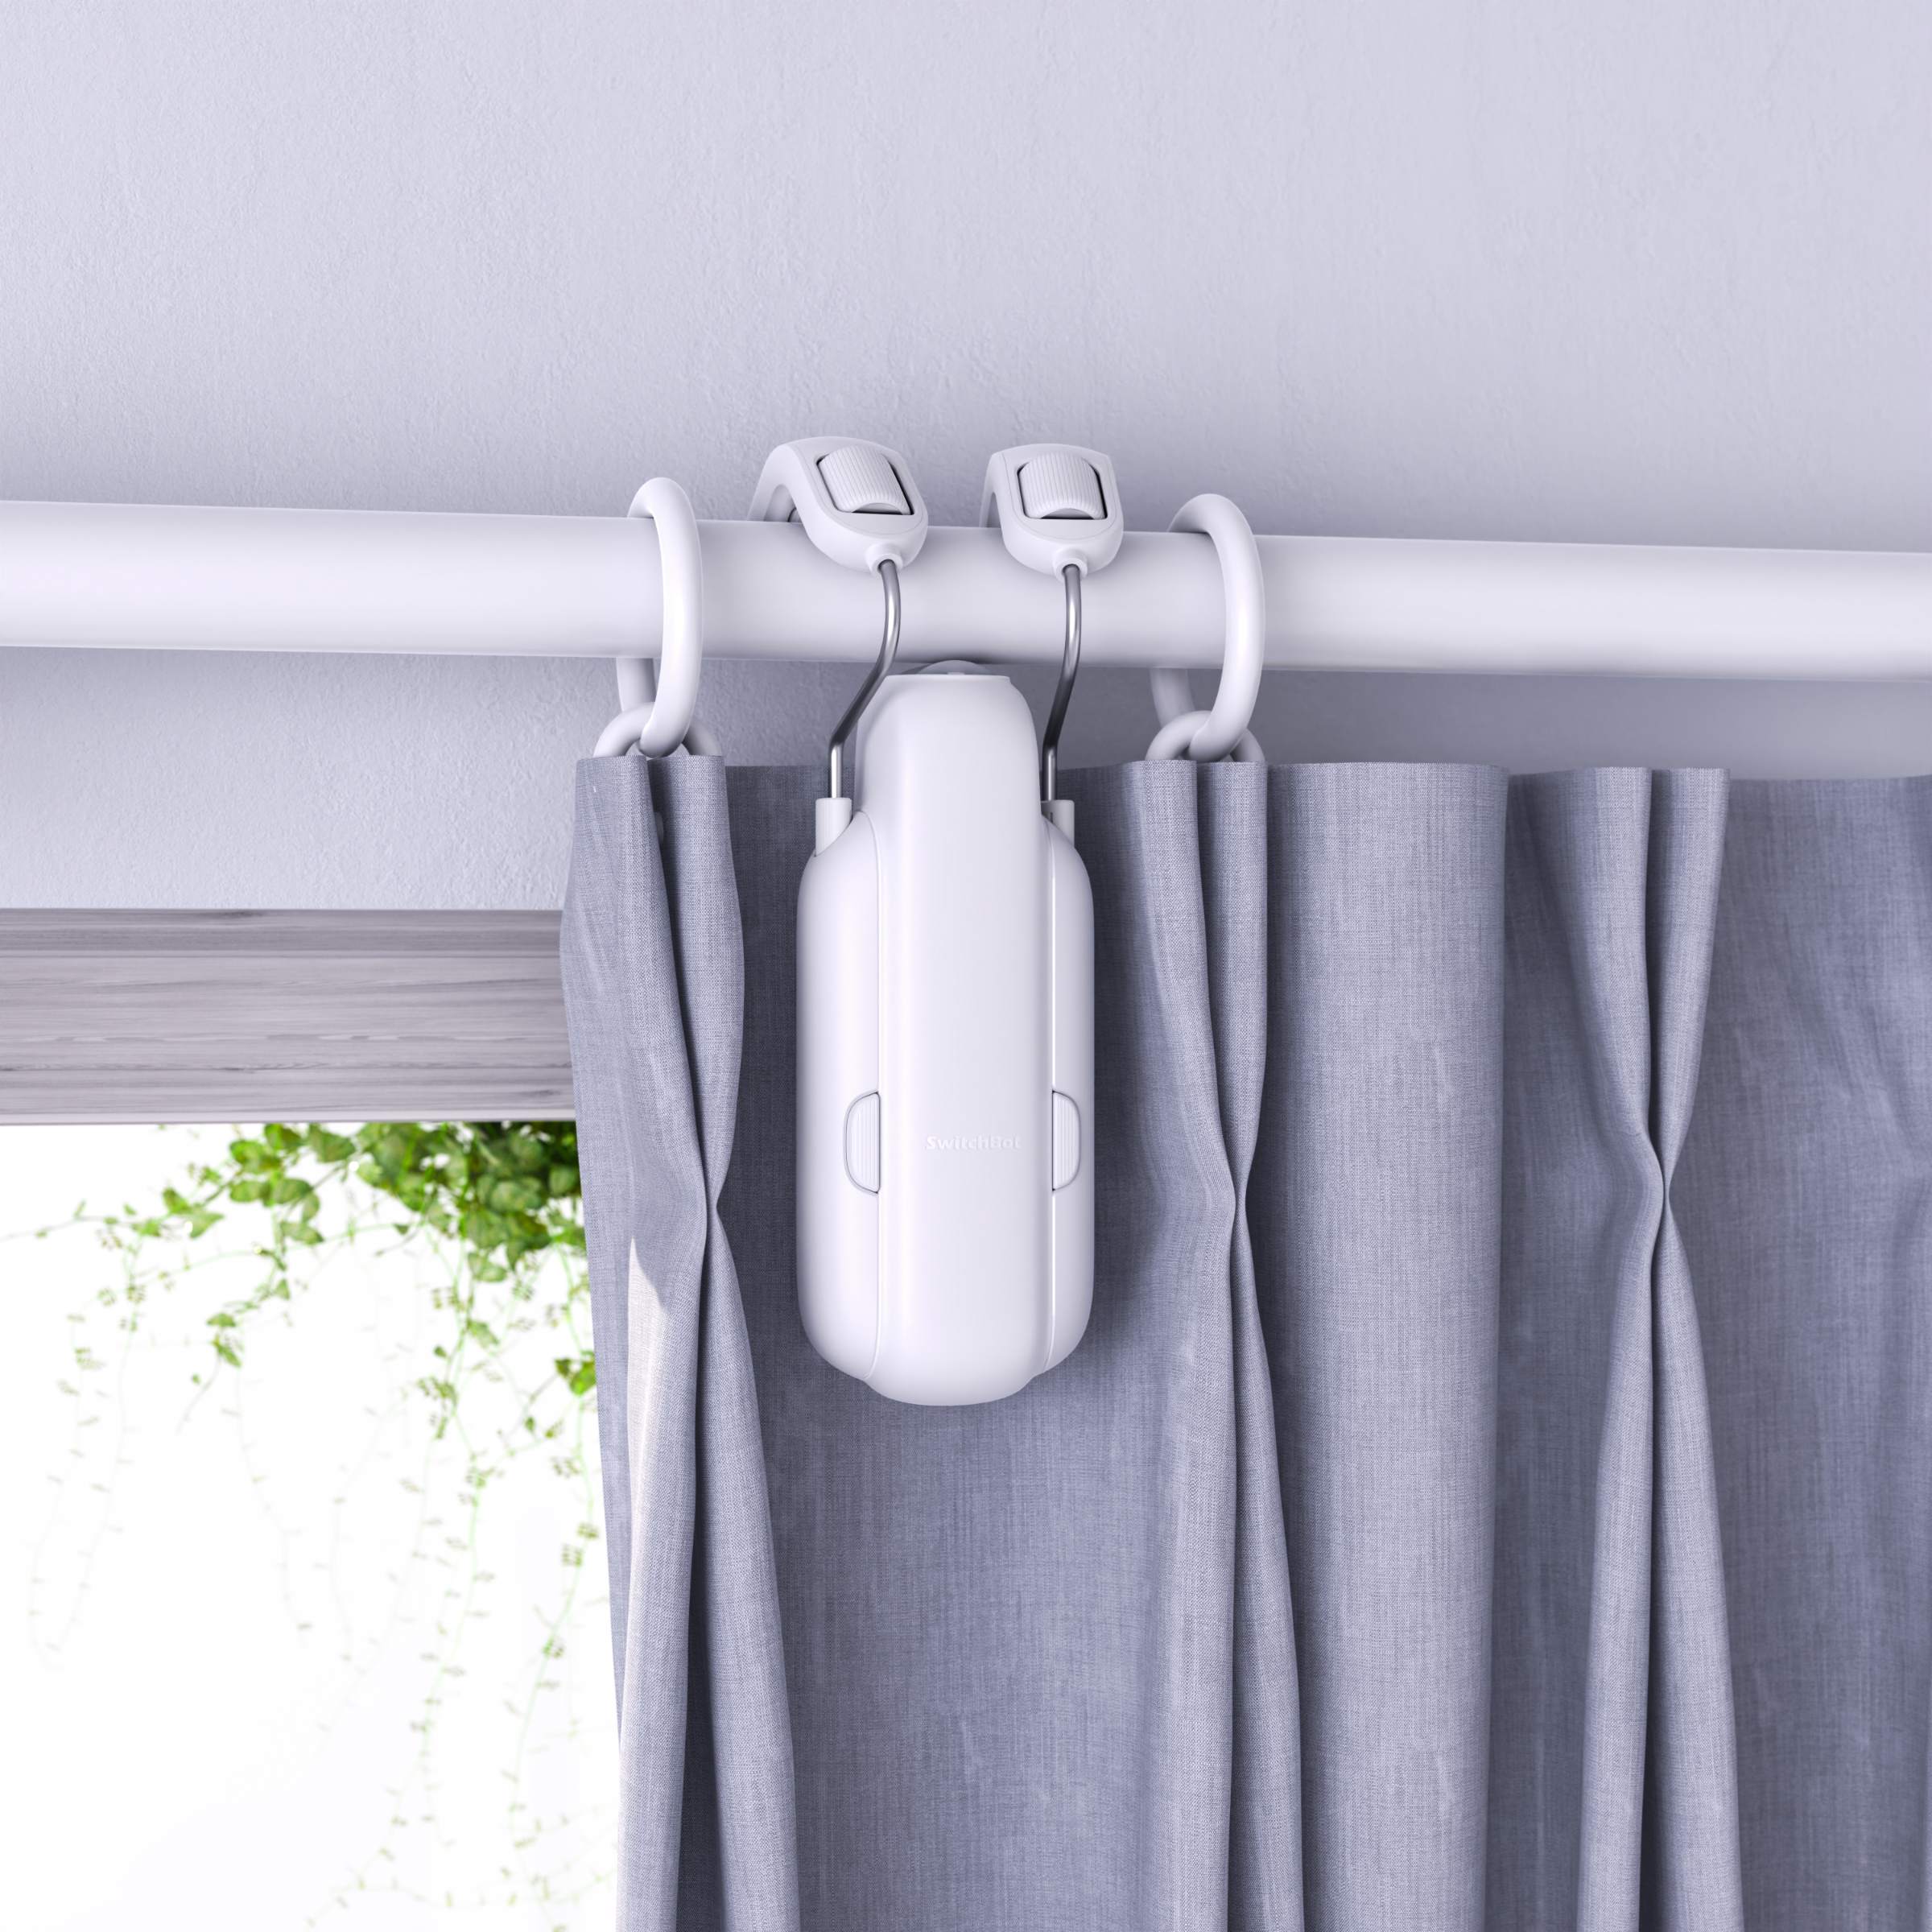 SwitchBot Curtain review: A noisy solution to a non-problem